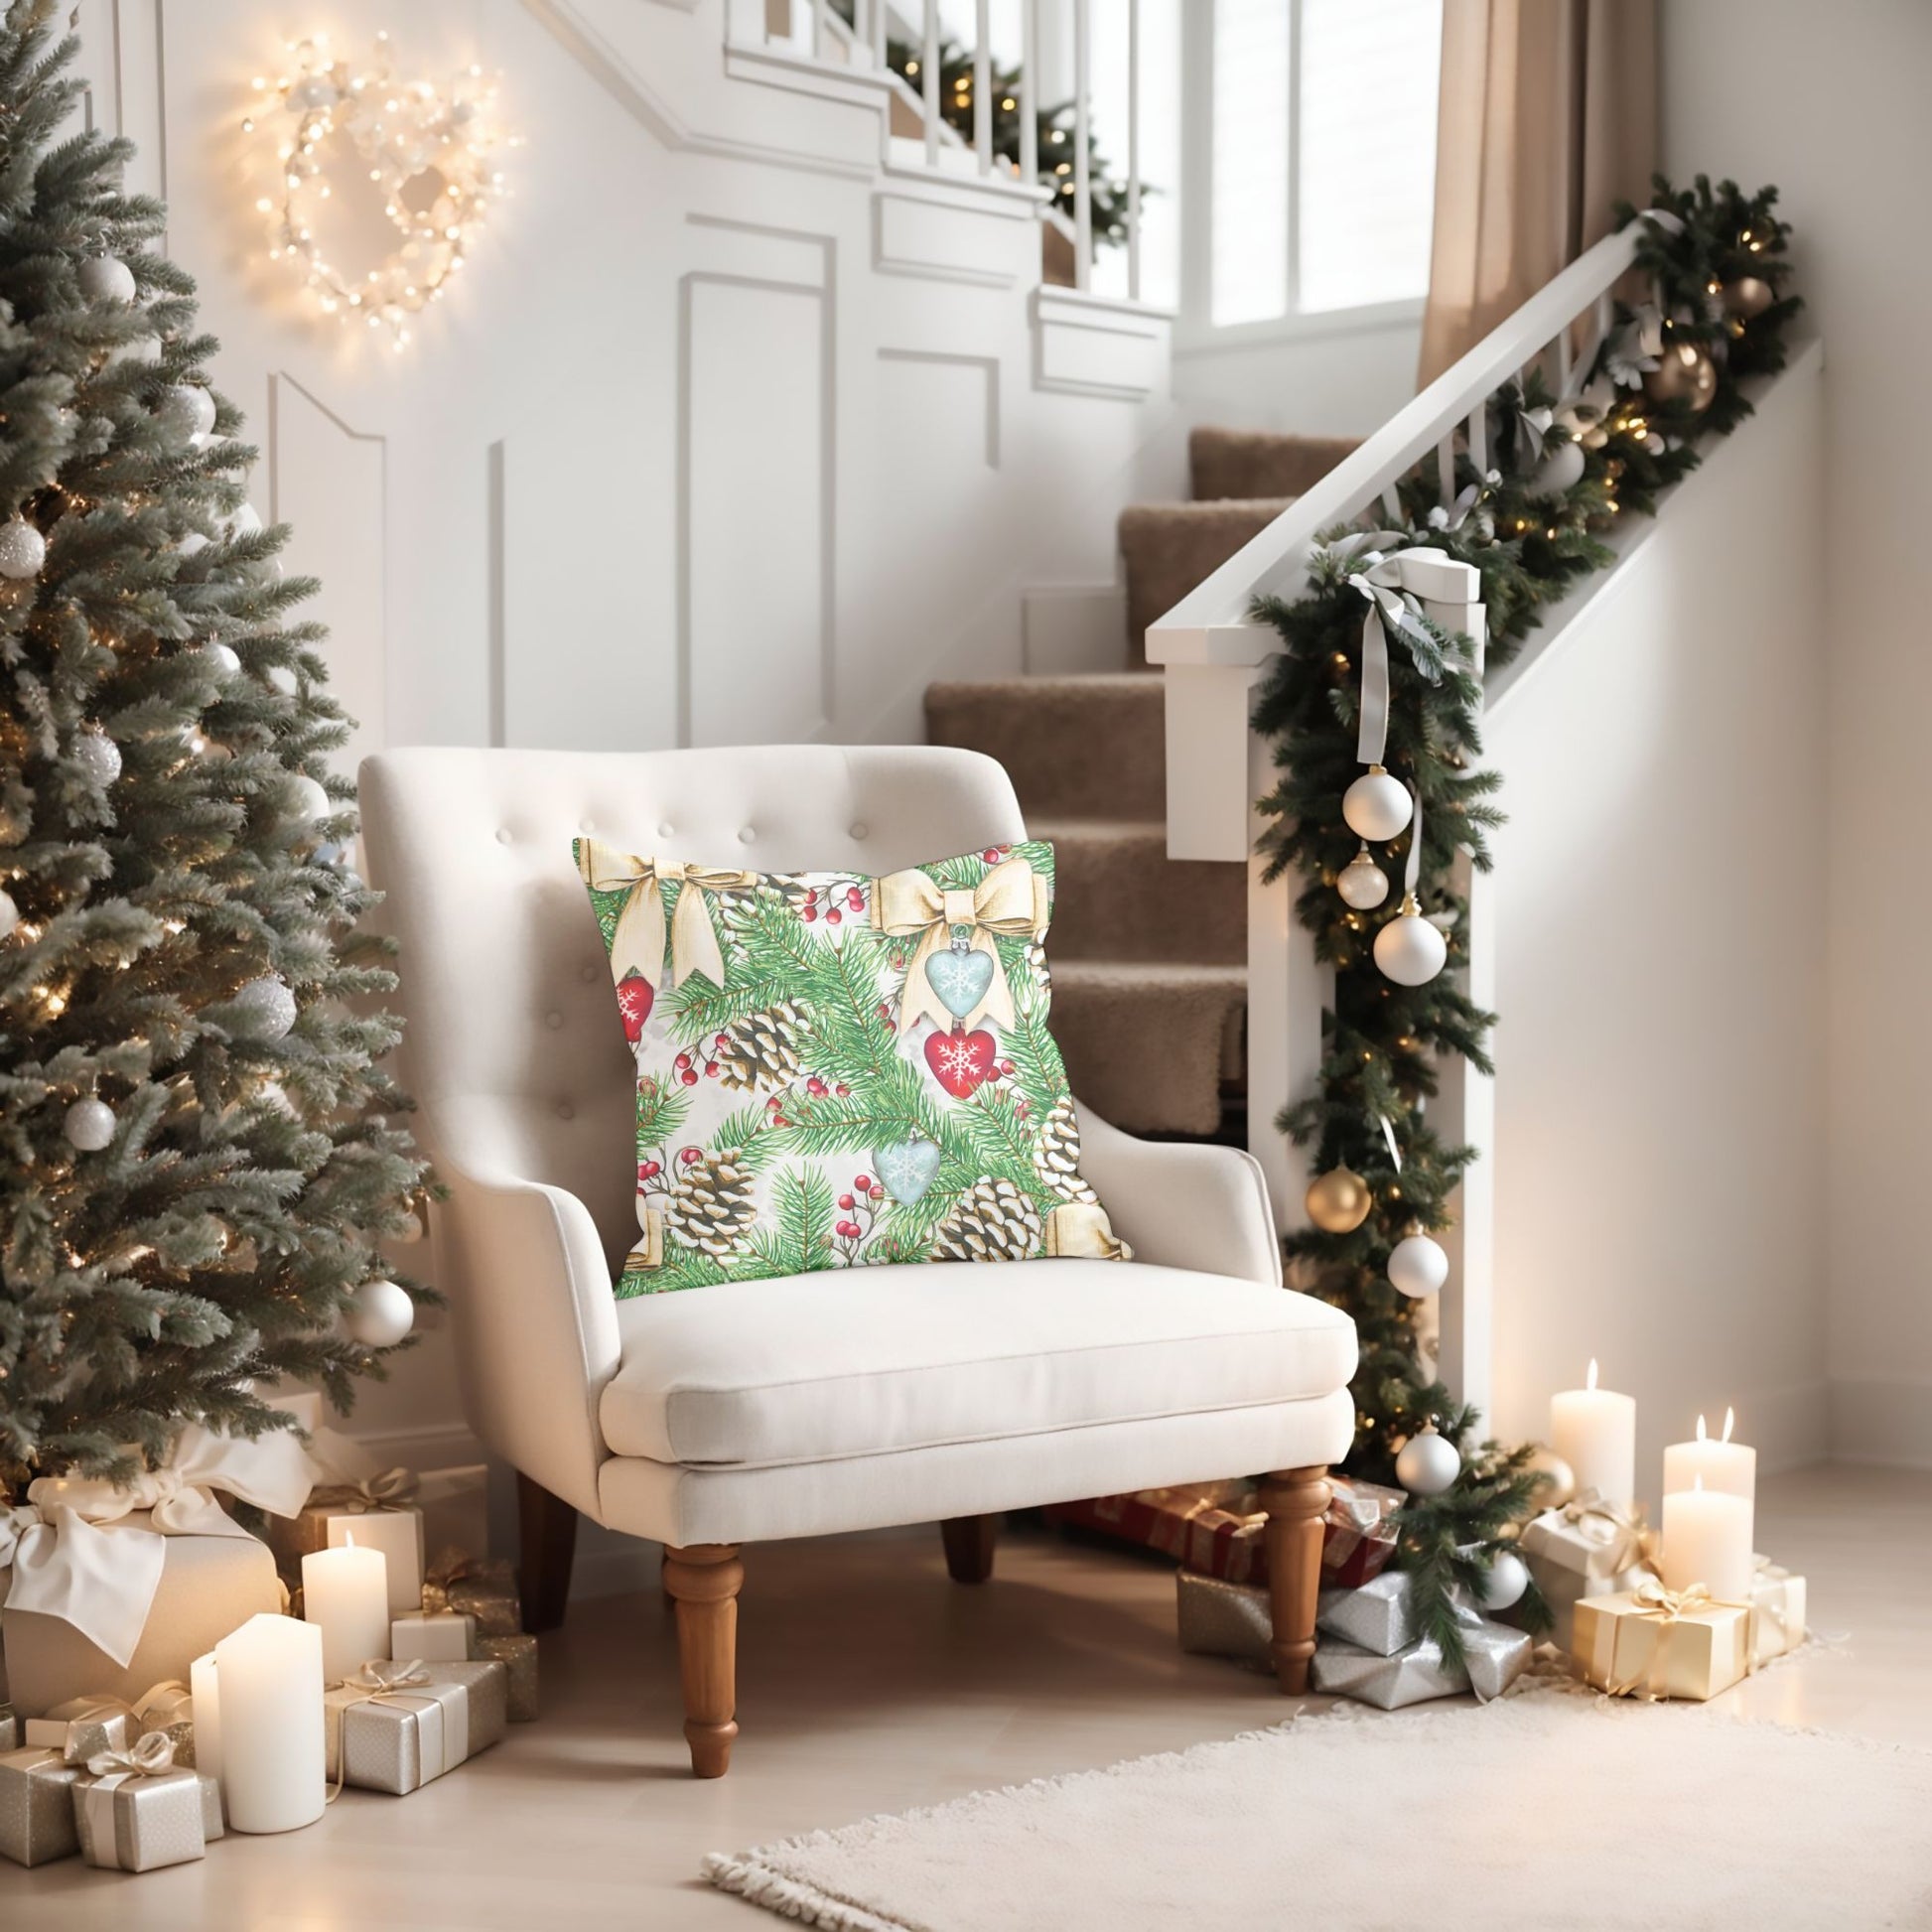 Cozy Living Room Decor with Green Christmas Pillow